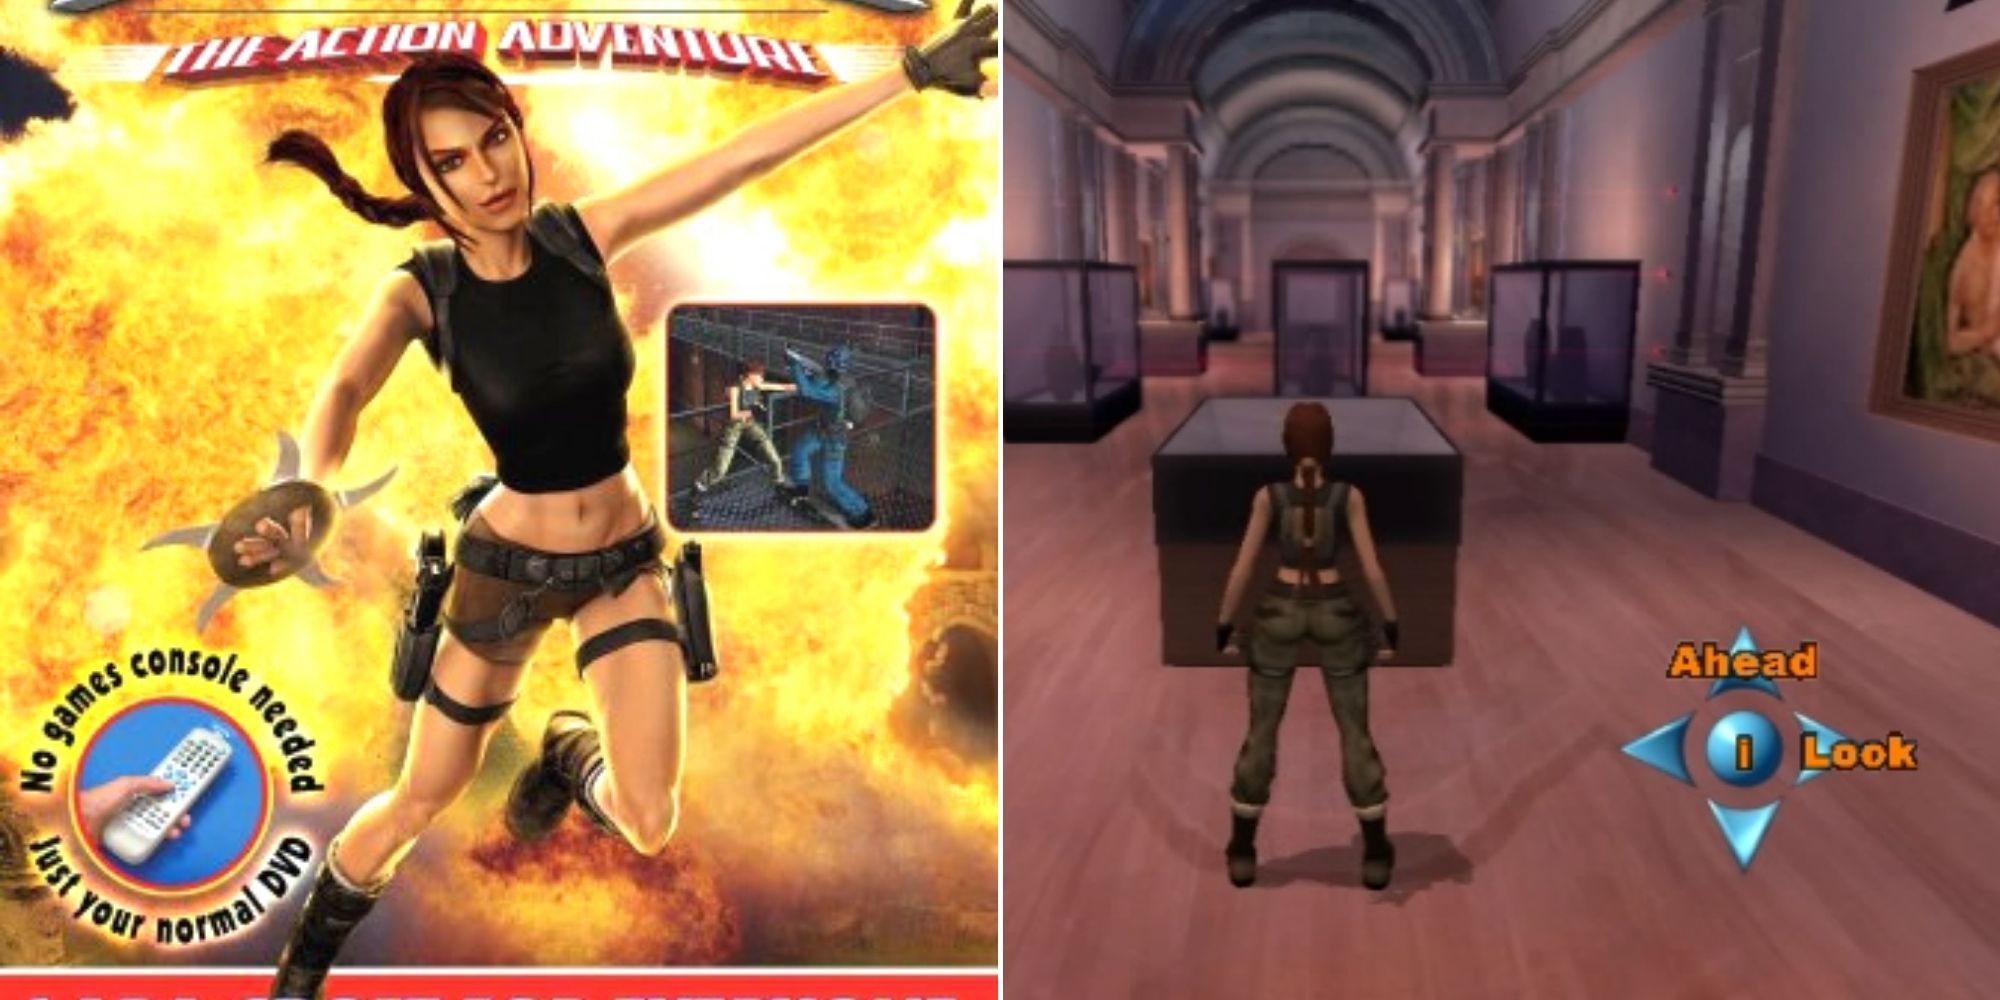 Tomb Raider: The Action Adventure Cover Art and Lara Croft in a gallery with options on the screen to control her actions